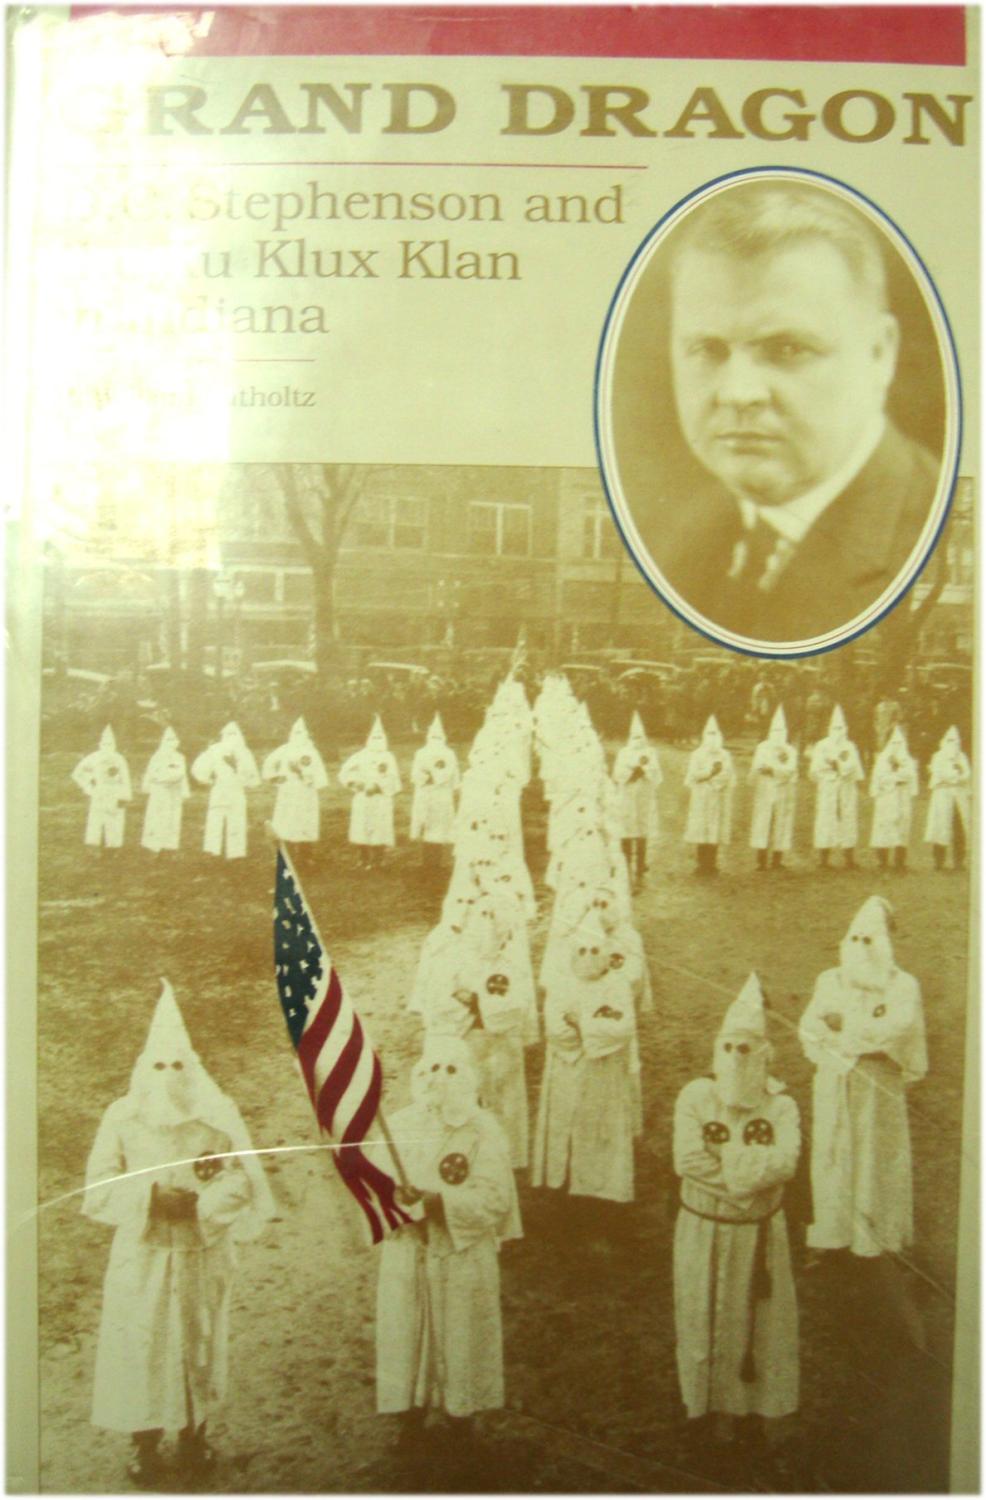 Grand Dragon: D.C. Stephenson and the Klu Klux Klan in Indiana - Lutholtz, M. William